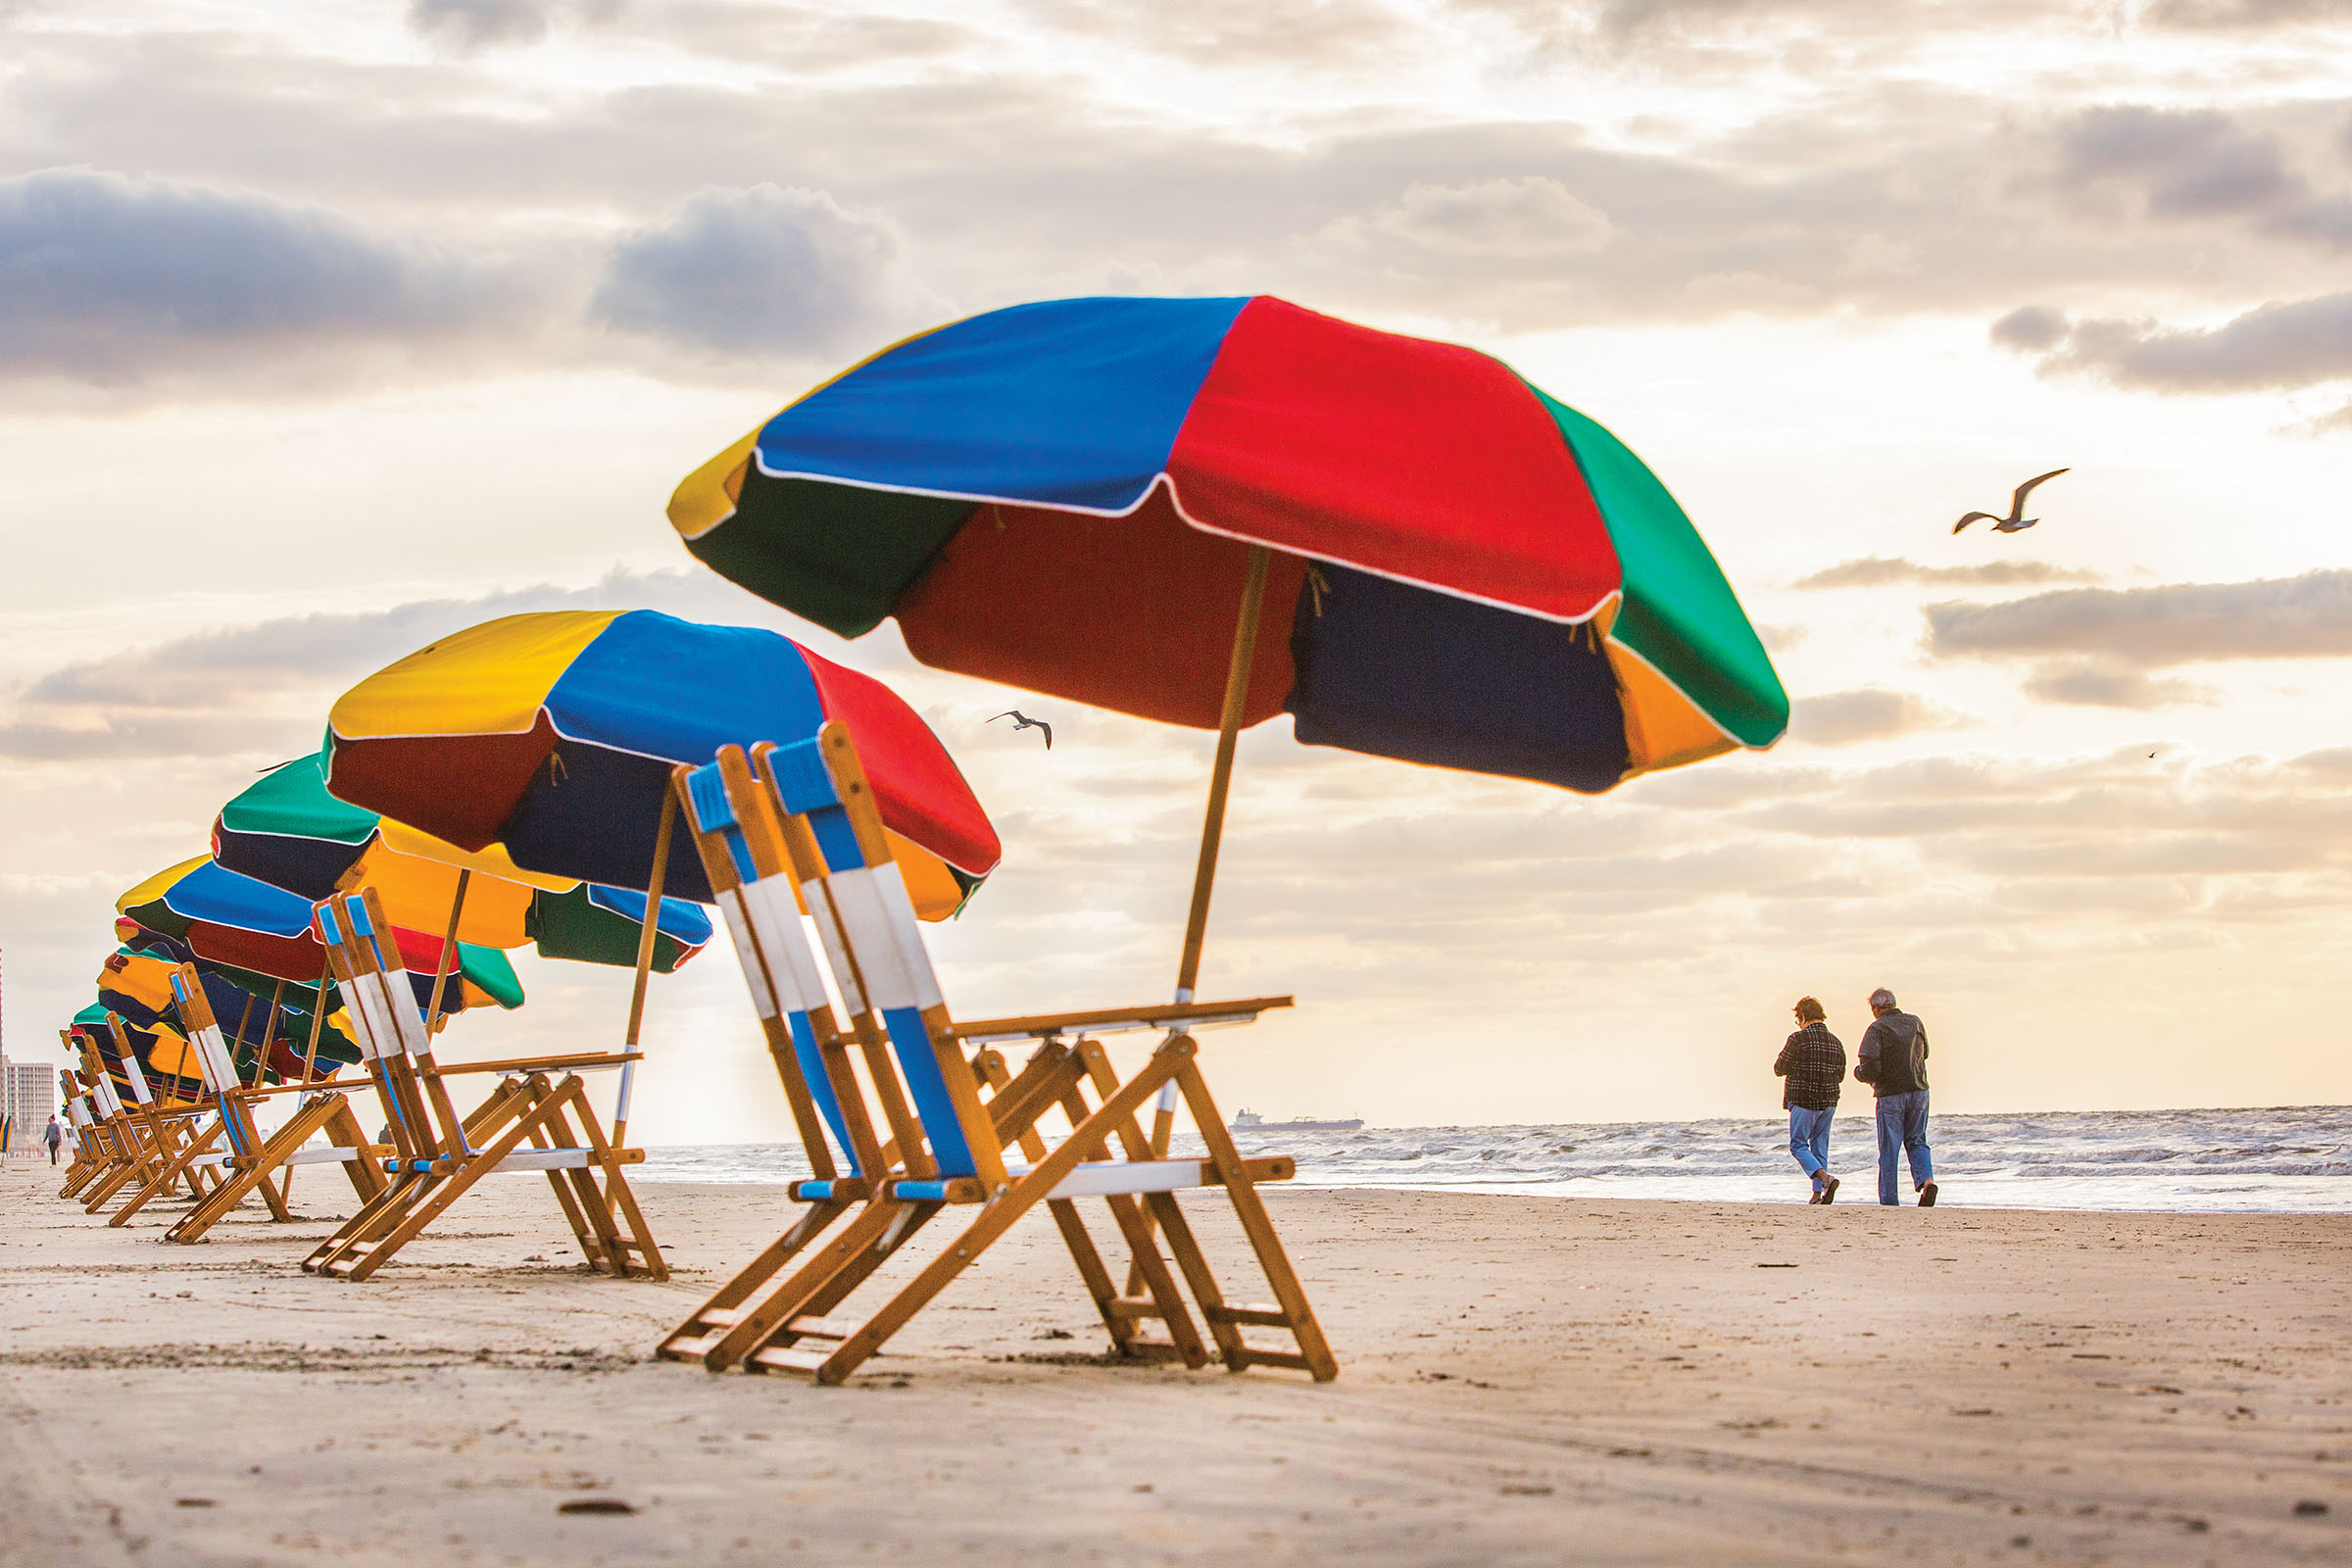 Brightly colored beach umbrellas stand in the sand above beach chairs while a couple walks in the sand